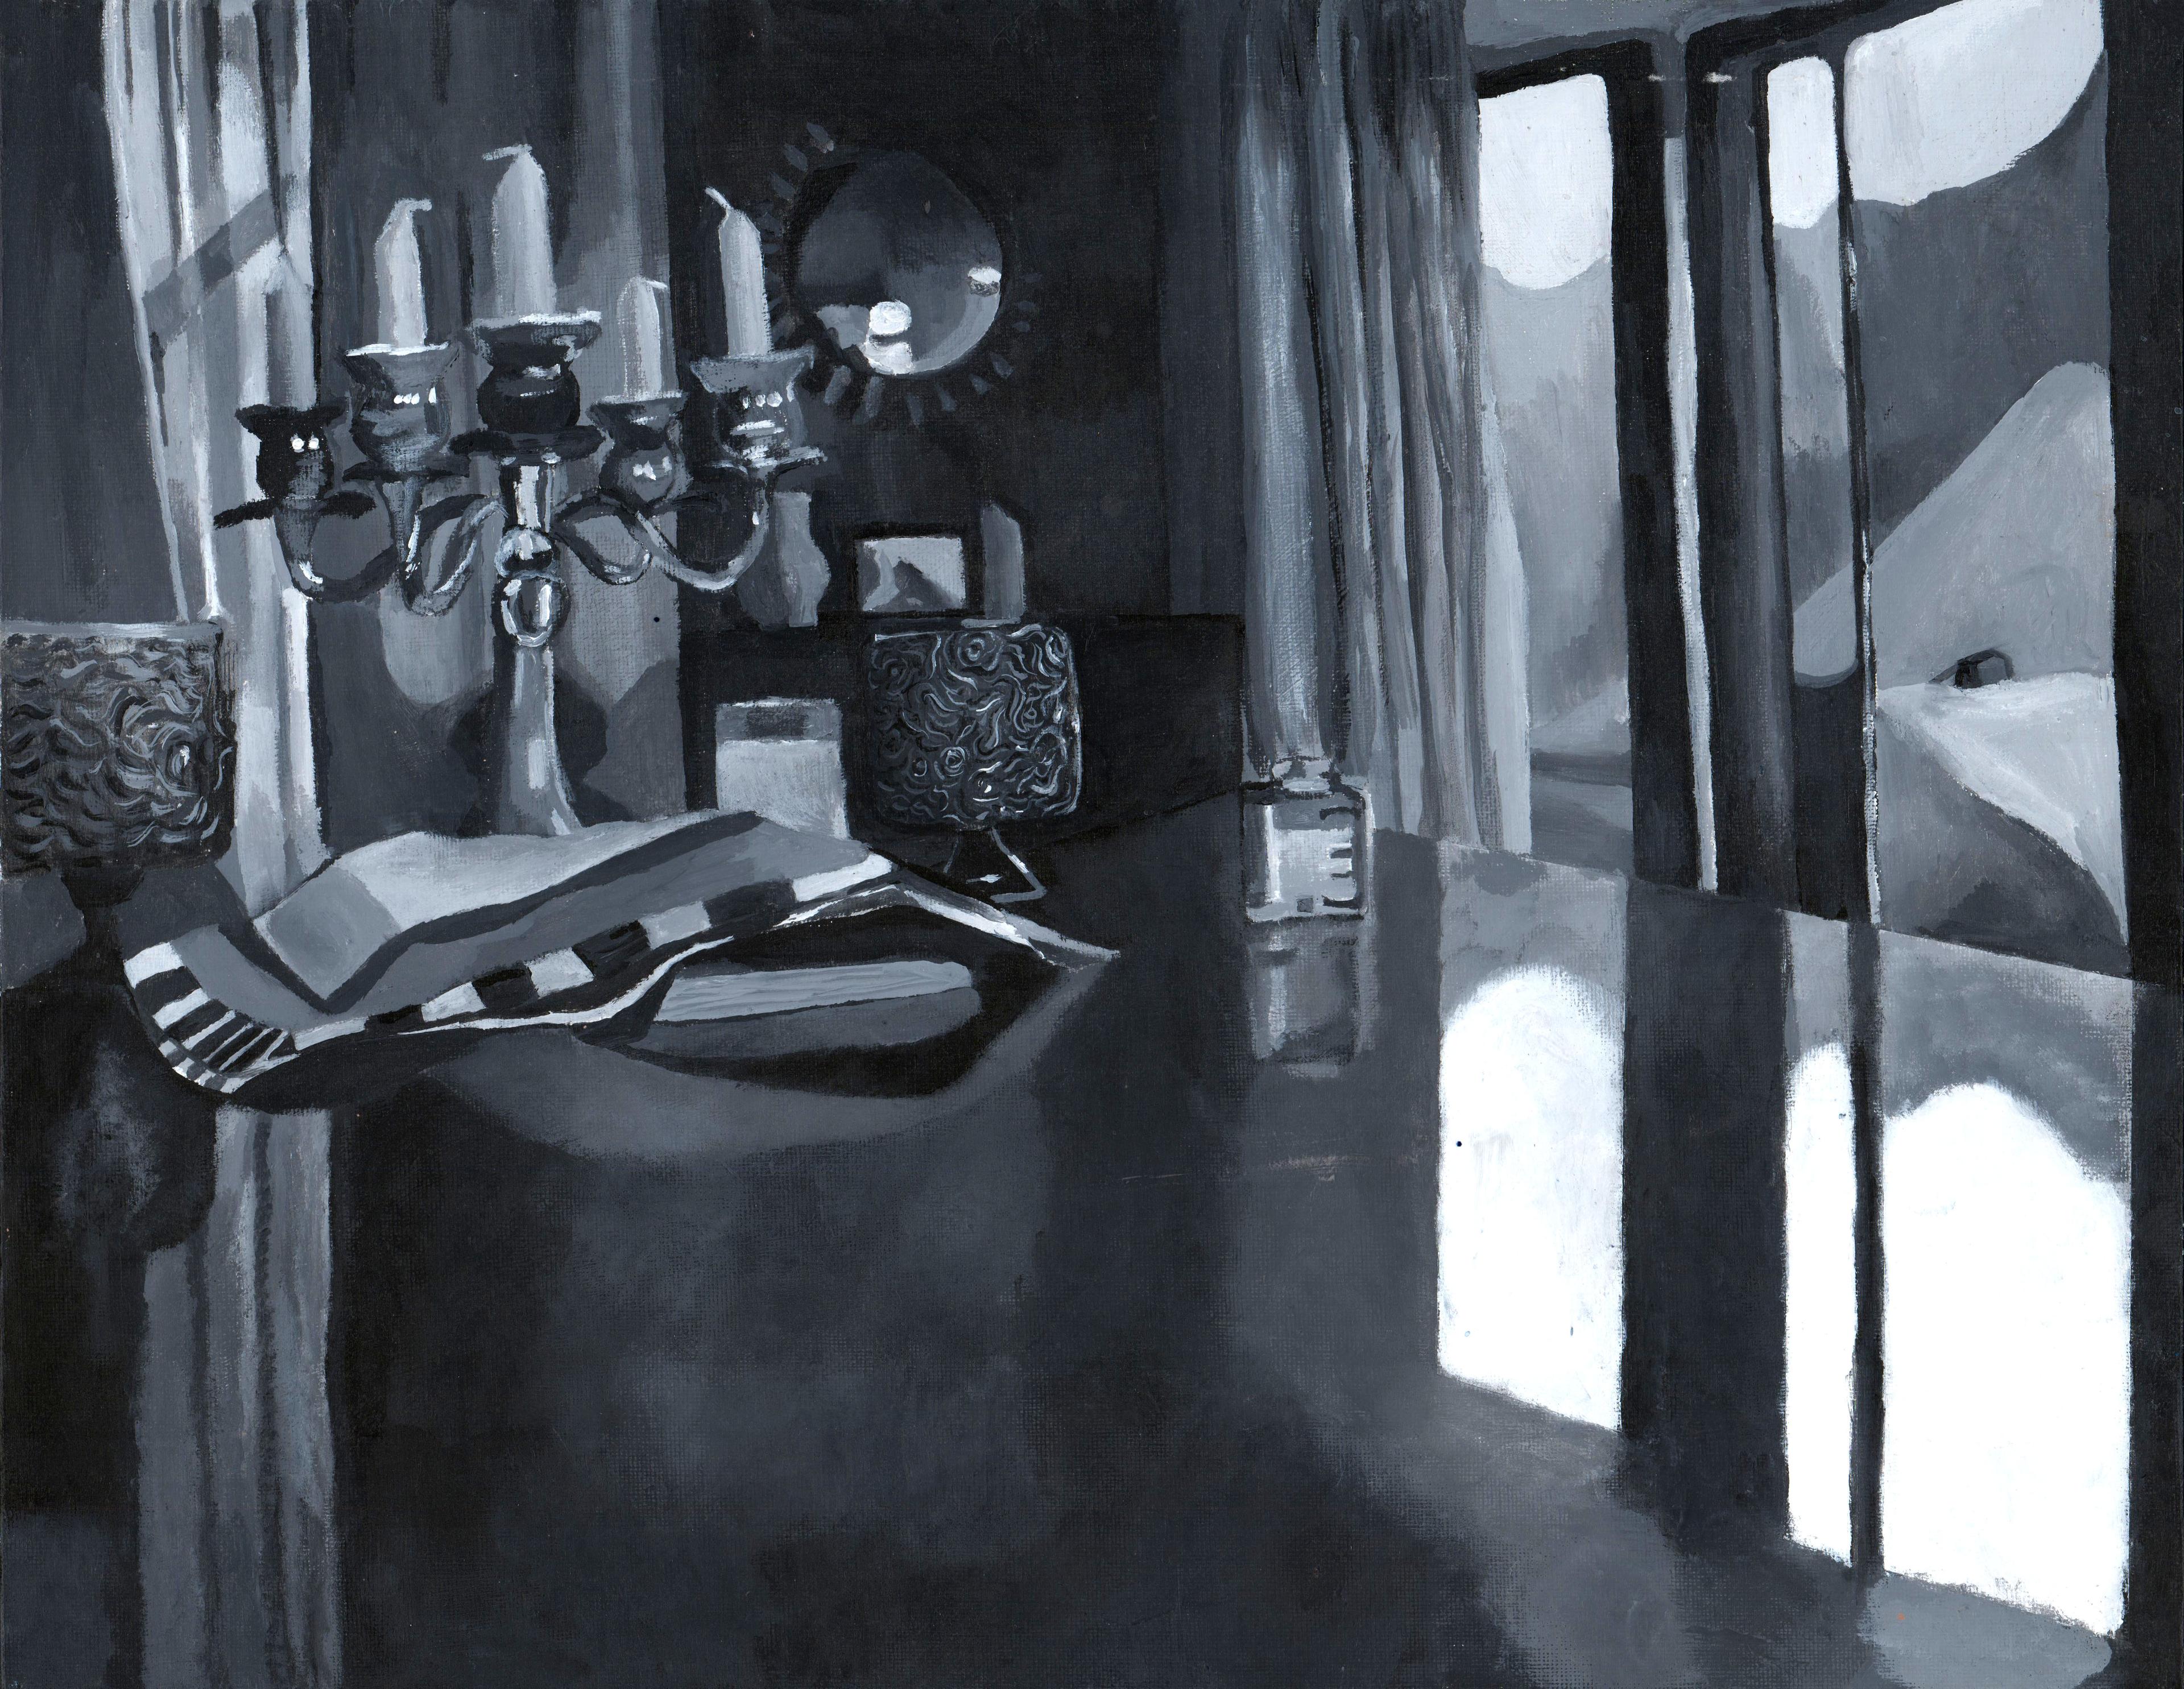 Acrylic blue-and-gray-hued painting of a Shabbat table in a dimly lit room. A folded cloth is draped on the far end of the table that faces the wall, in front of a brass candle holder containing five unlit candles. A few glasses and ornate cups sit on the table around the candle holder. Drapes are pulled back on the wall behind the table to the right, and reflected light from the windows shines on the surface of the table. A round mirror hangs on the wall behind the table to the right, also catching reflections along its surface.